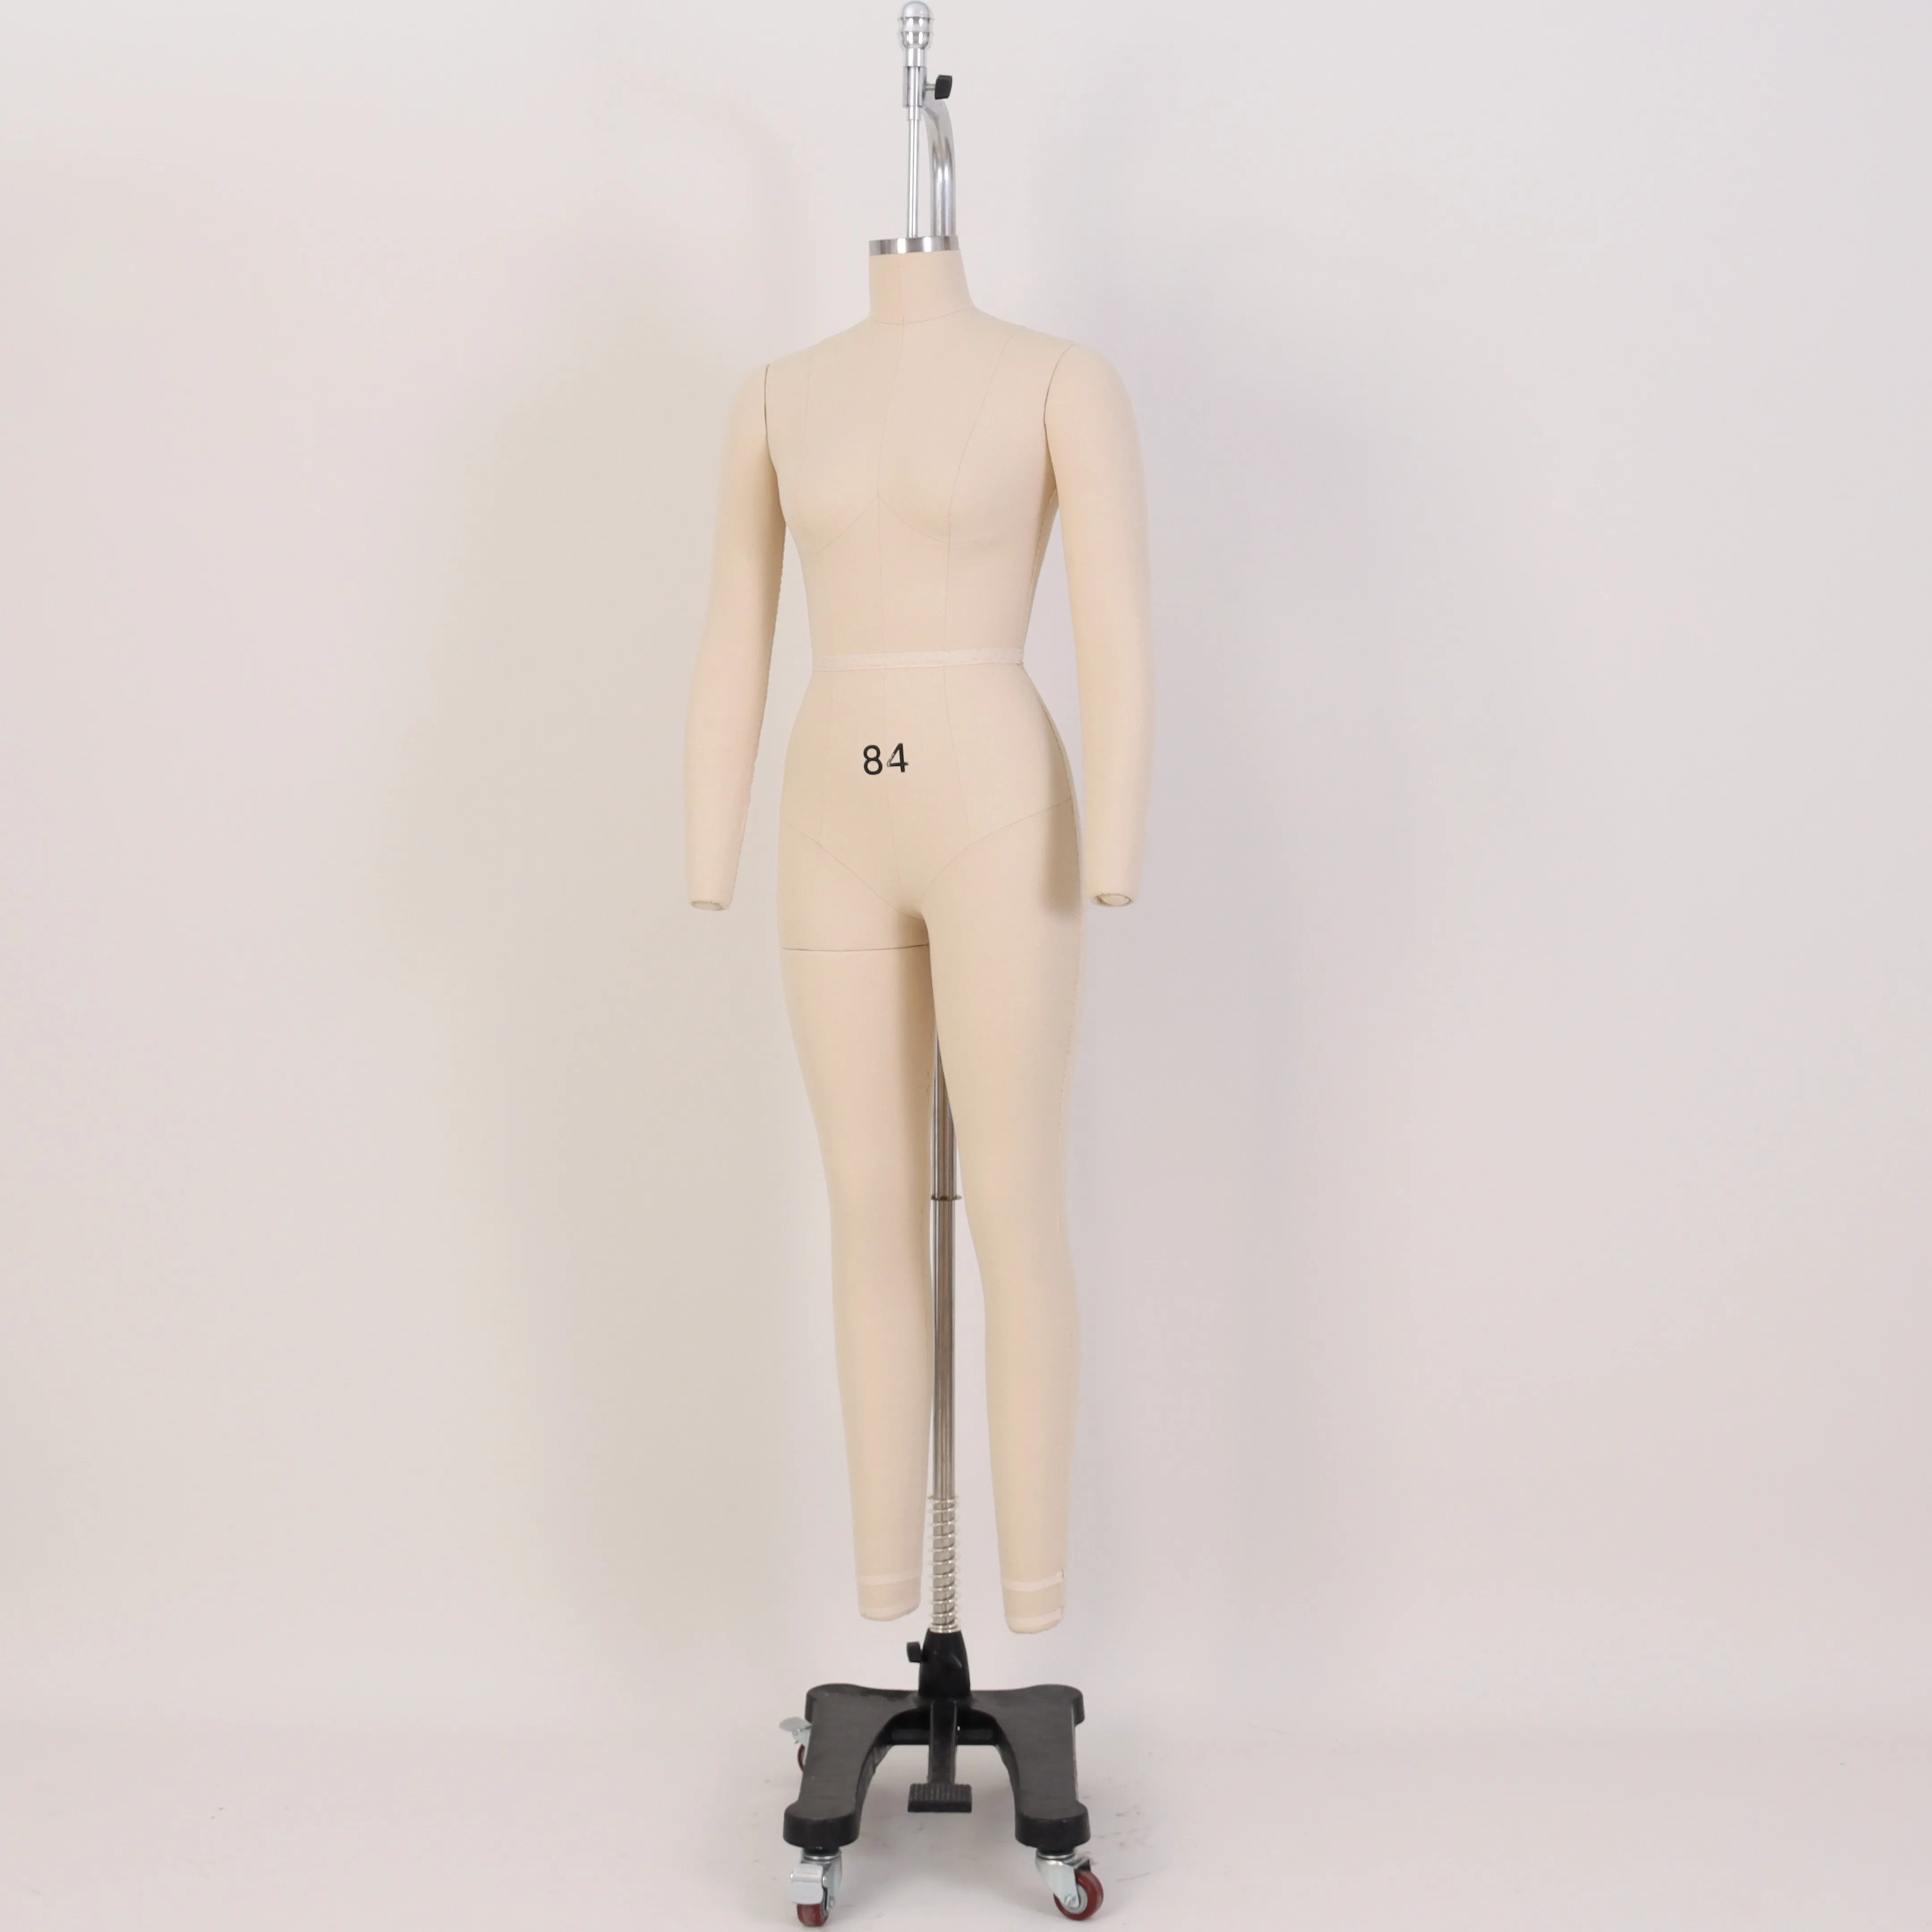 Professional Female Full Body Dress Form w/ Collapsible Shoulders and  Removable Arms